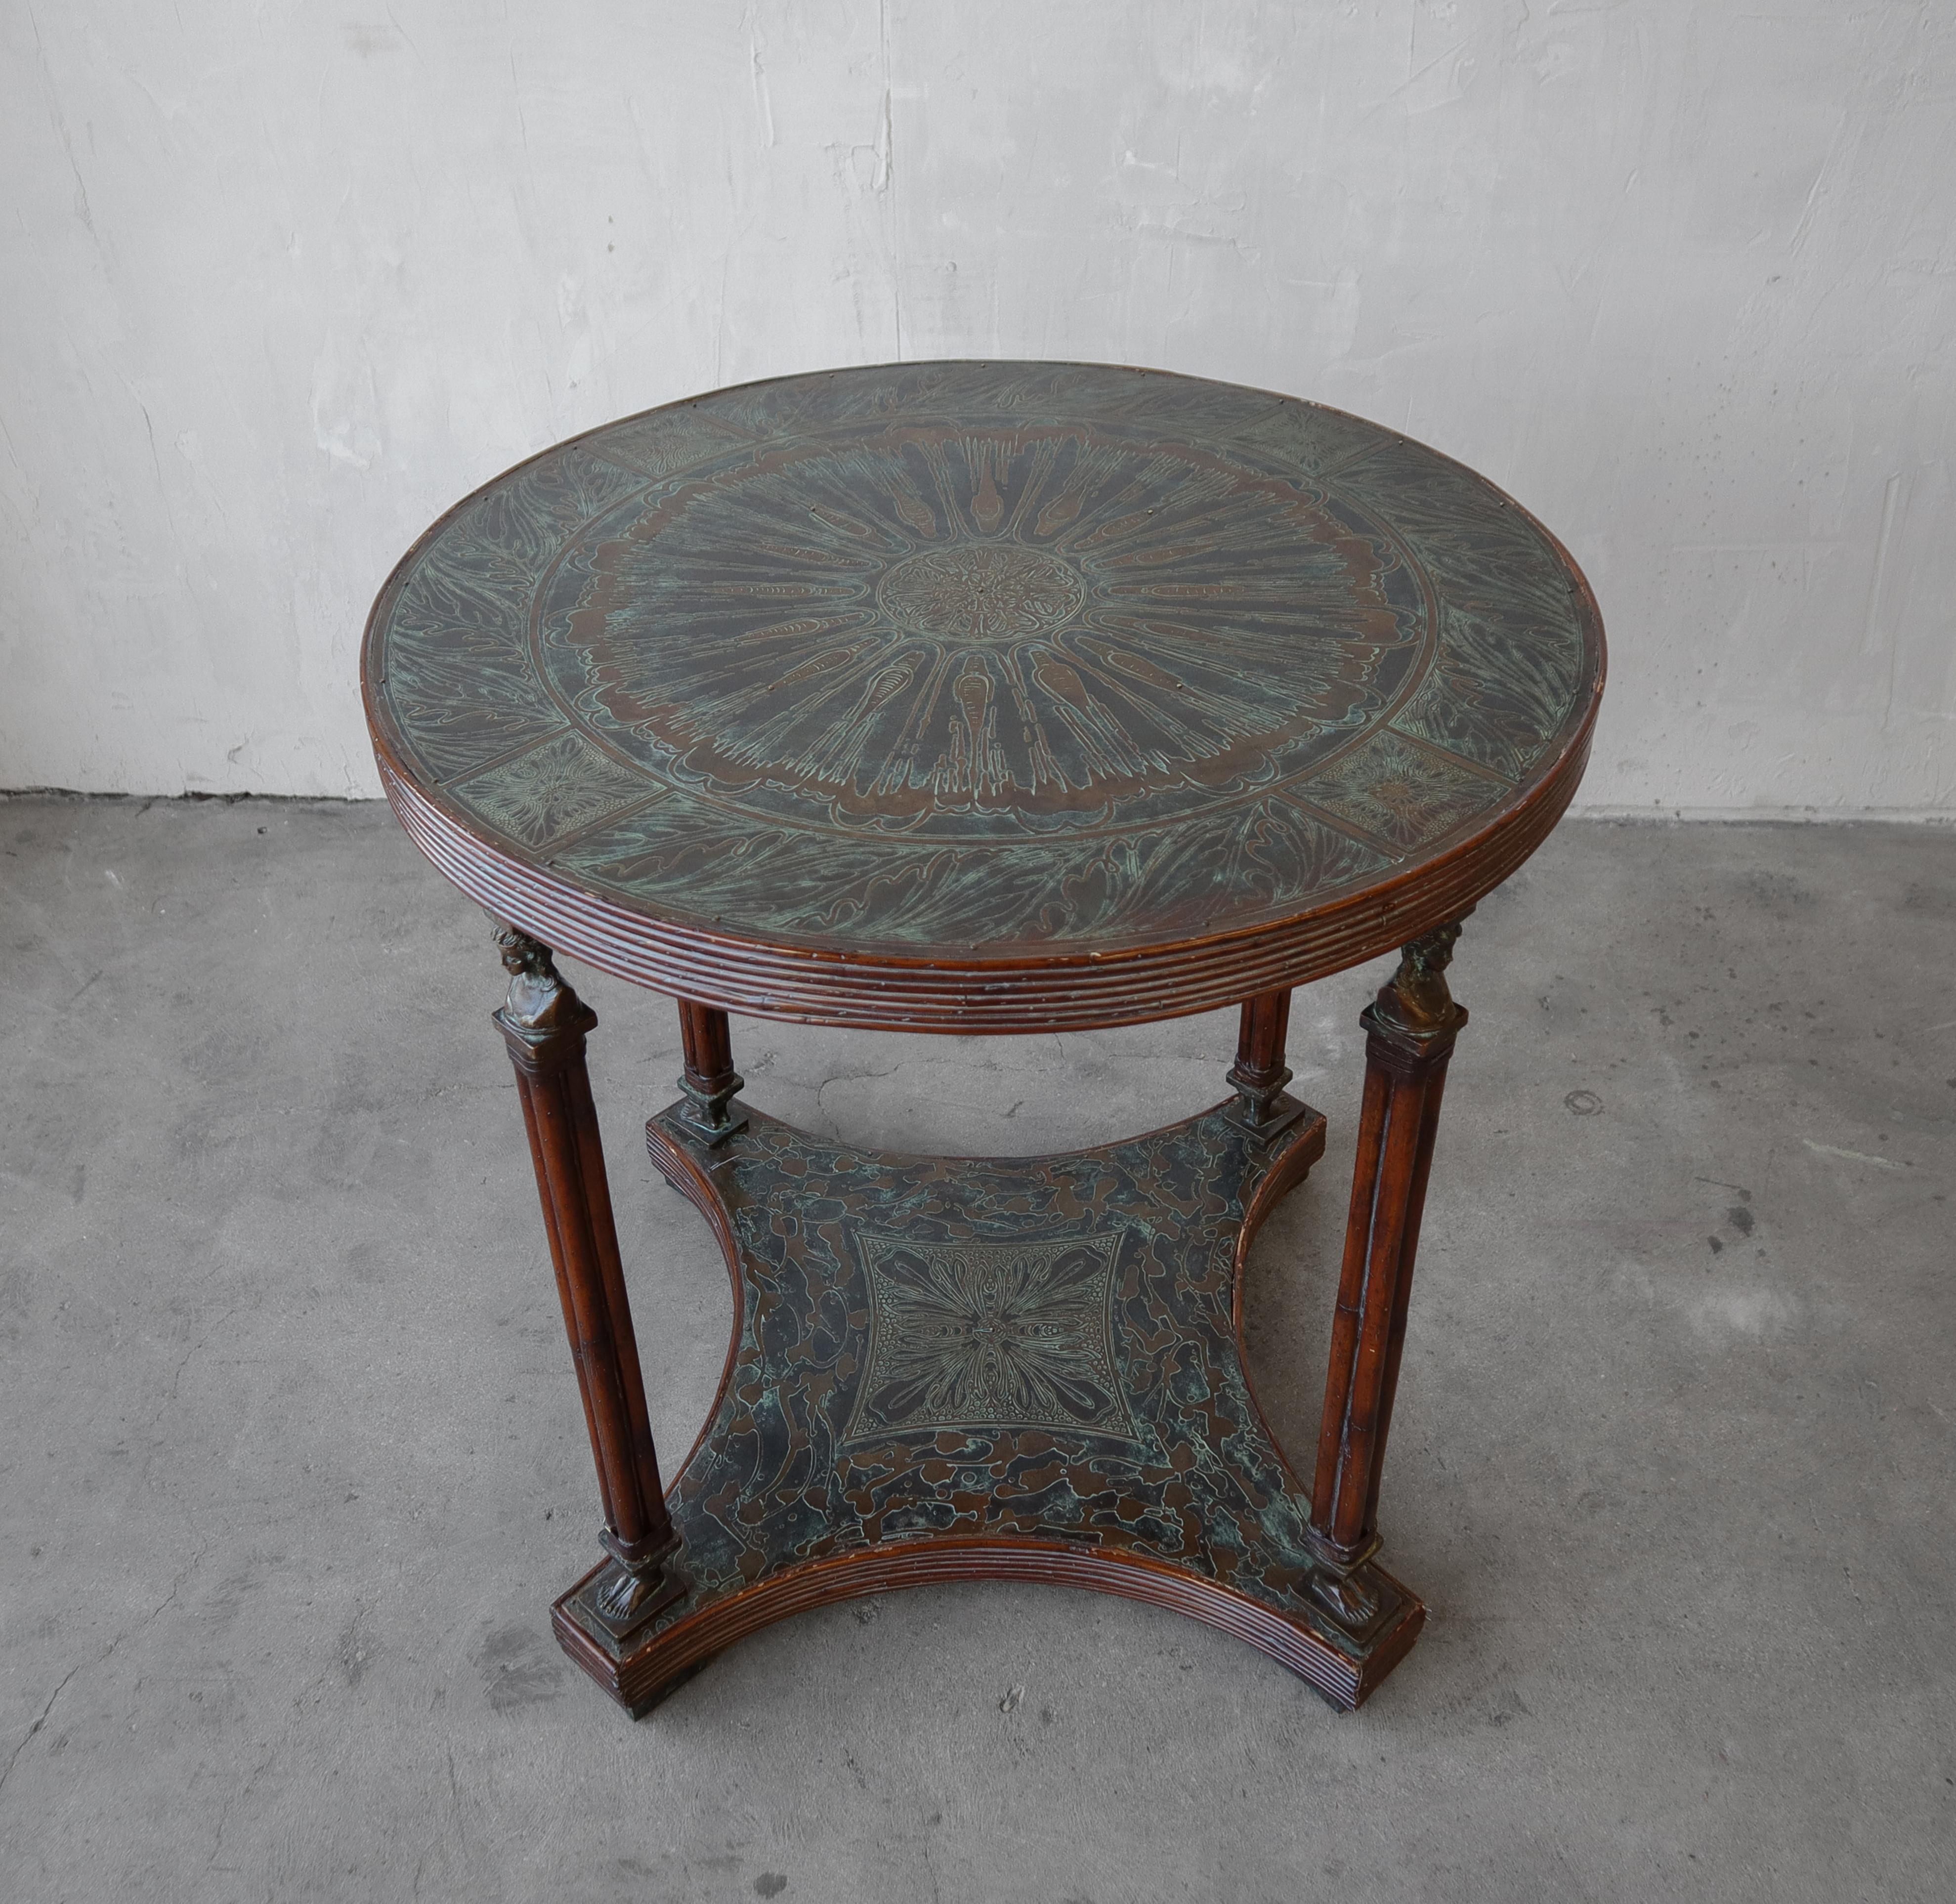 Absolutely gorgeous, perfectly patinaed, etched bronze and reed occasional table. The table is a nice size, It would be perfect with 2 chairs or as a small center table in an entry. The etching details, combined with the art nouveau heads and feet